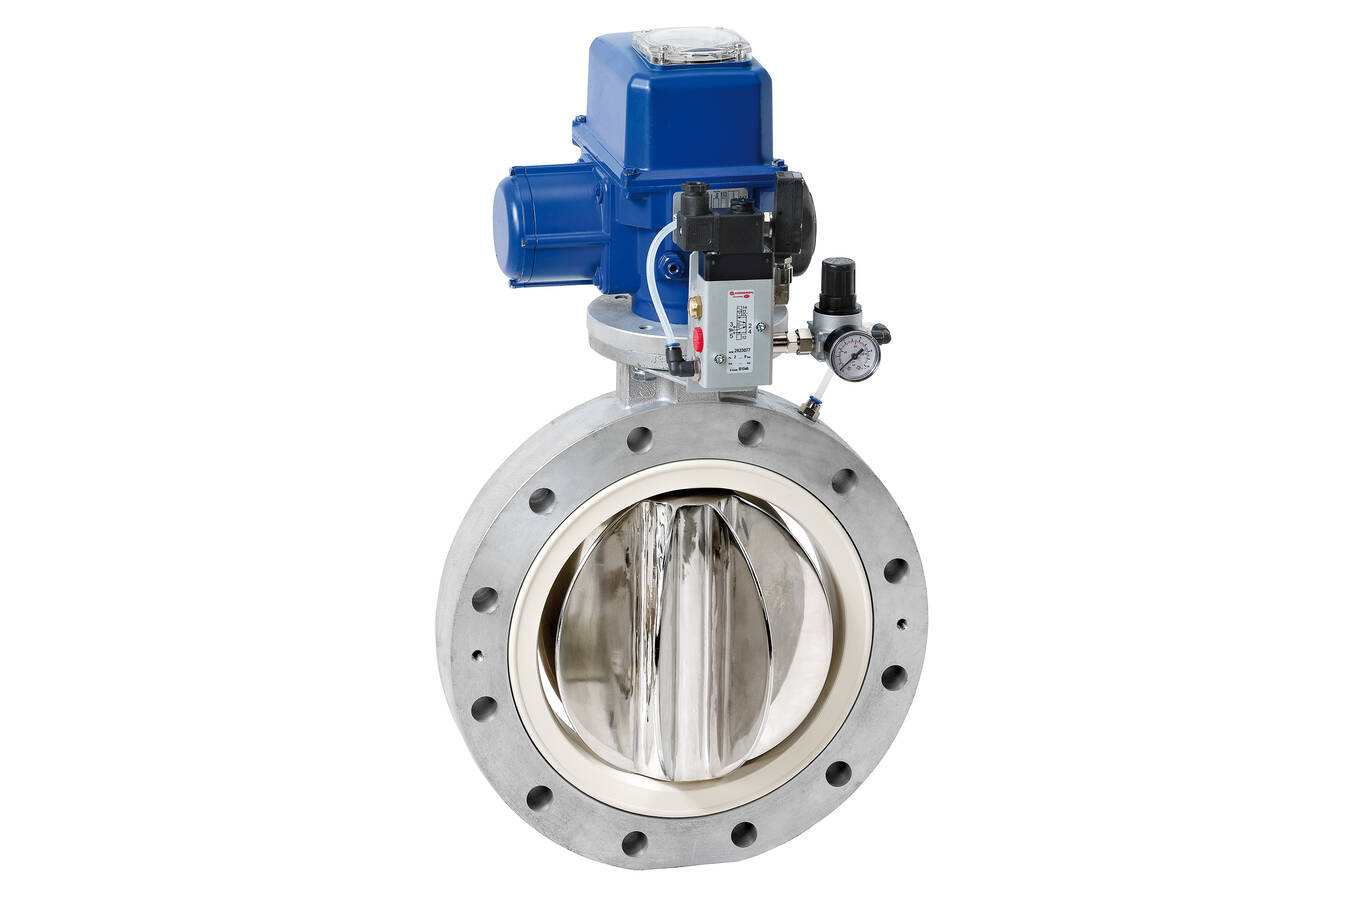 The dosage factor for optimal dosage Valves from Warex Valve prevent bridging of bulk solids so that fine dosing and container emptying are optimised